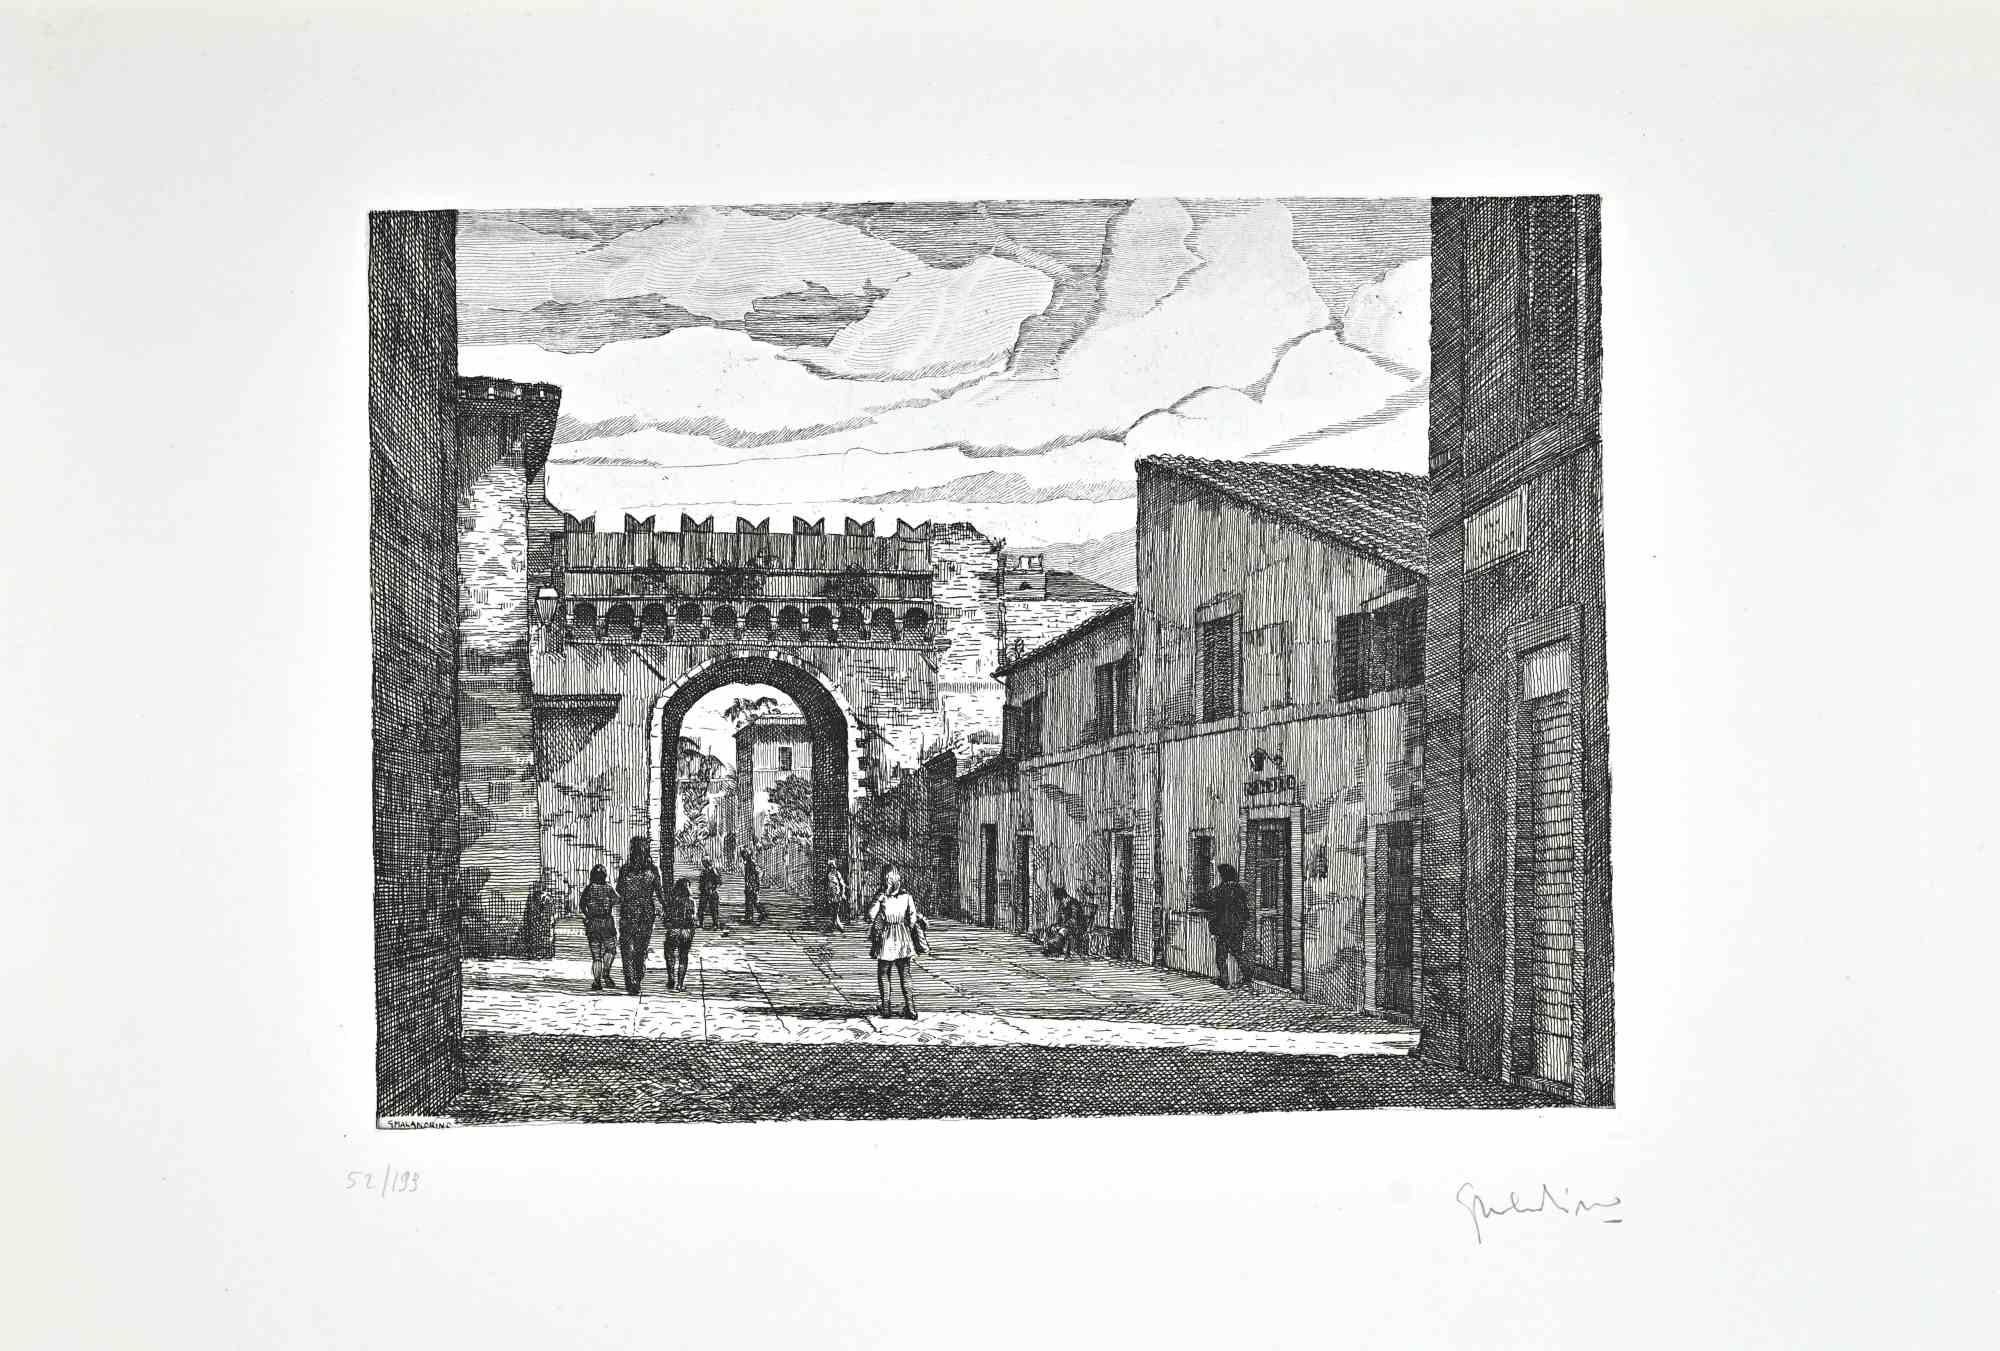 Borgo Pio - Rome is an artwork realized by Giuseppe Malandrino.

Original print in etching technique.

Hand-signed by the artist in pencil on the lower right corner.

Numbered n. 52/199 edition on the lower left corner.

Good conditions. 

Giuseppe